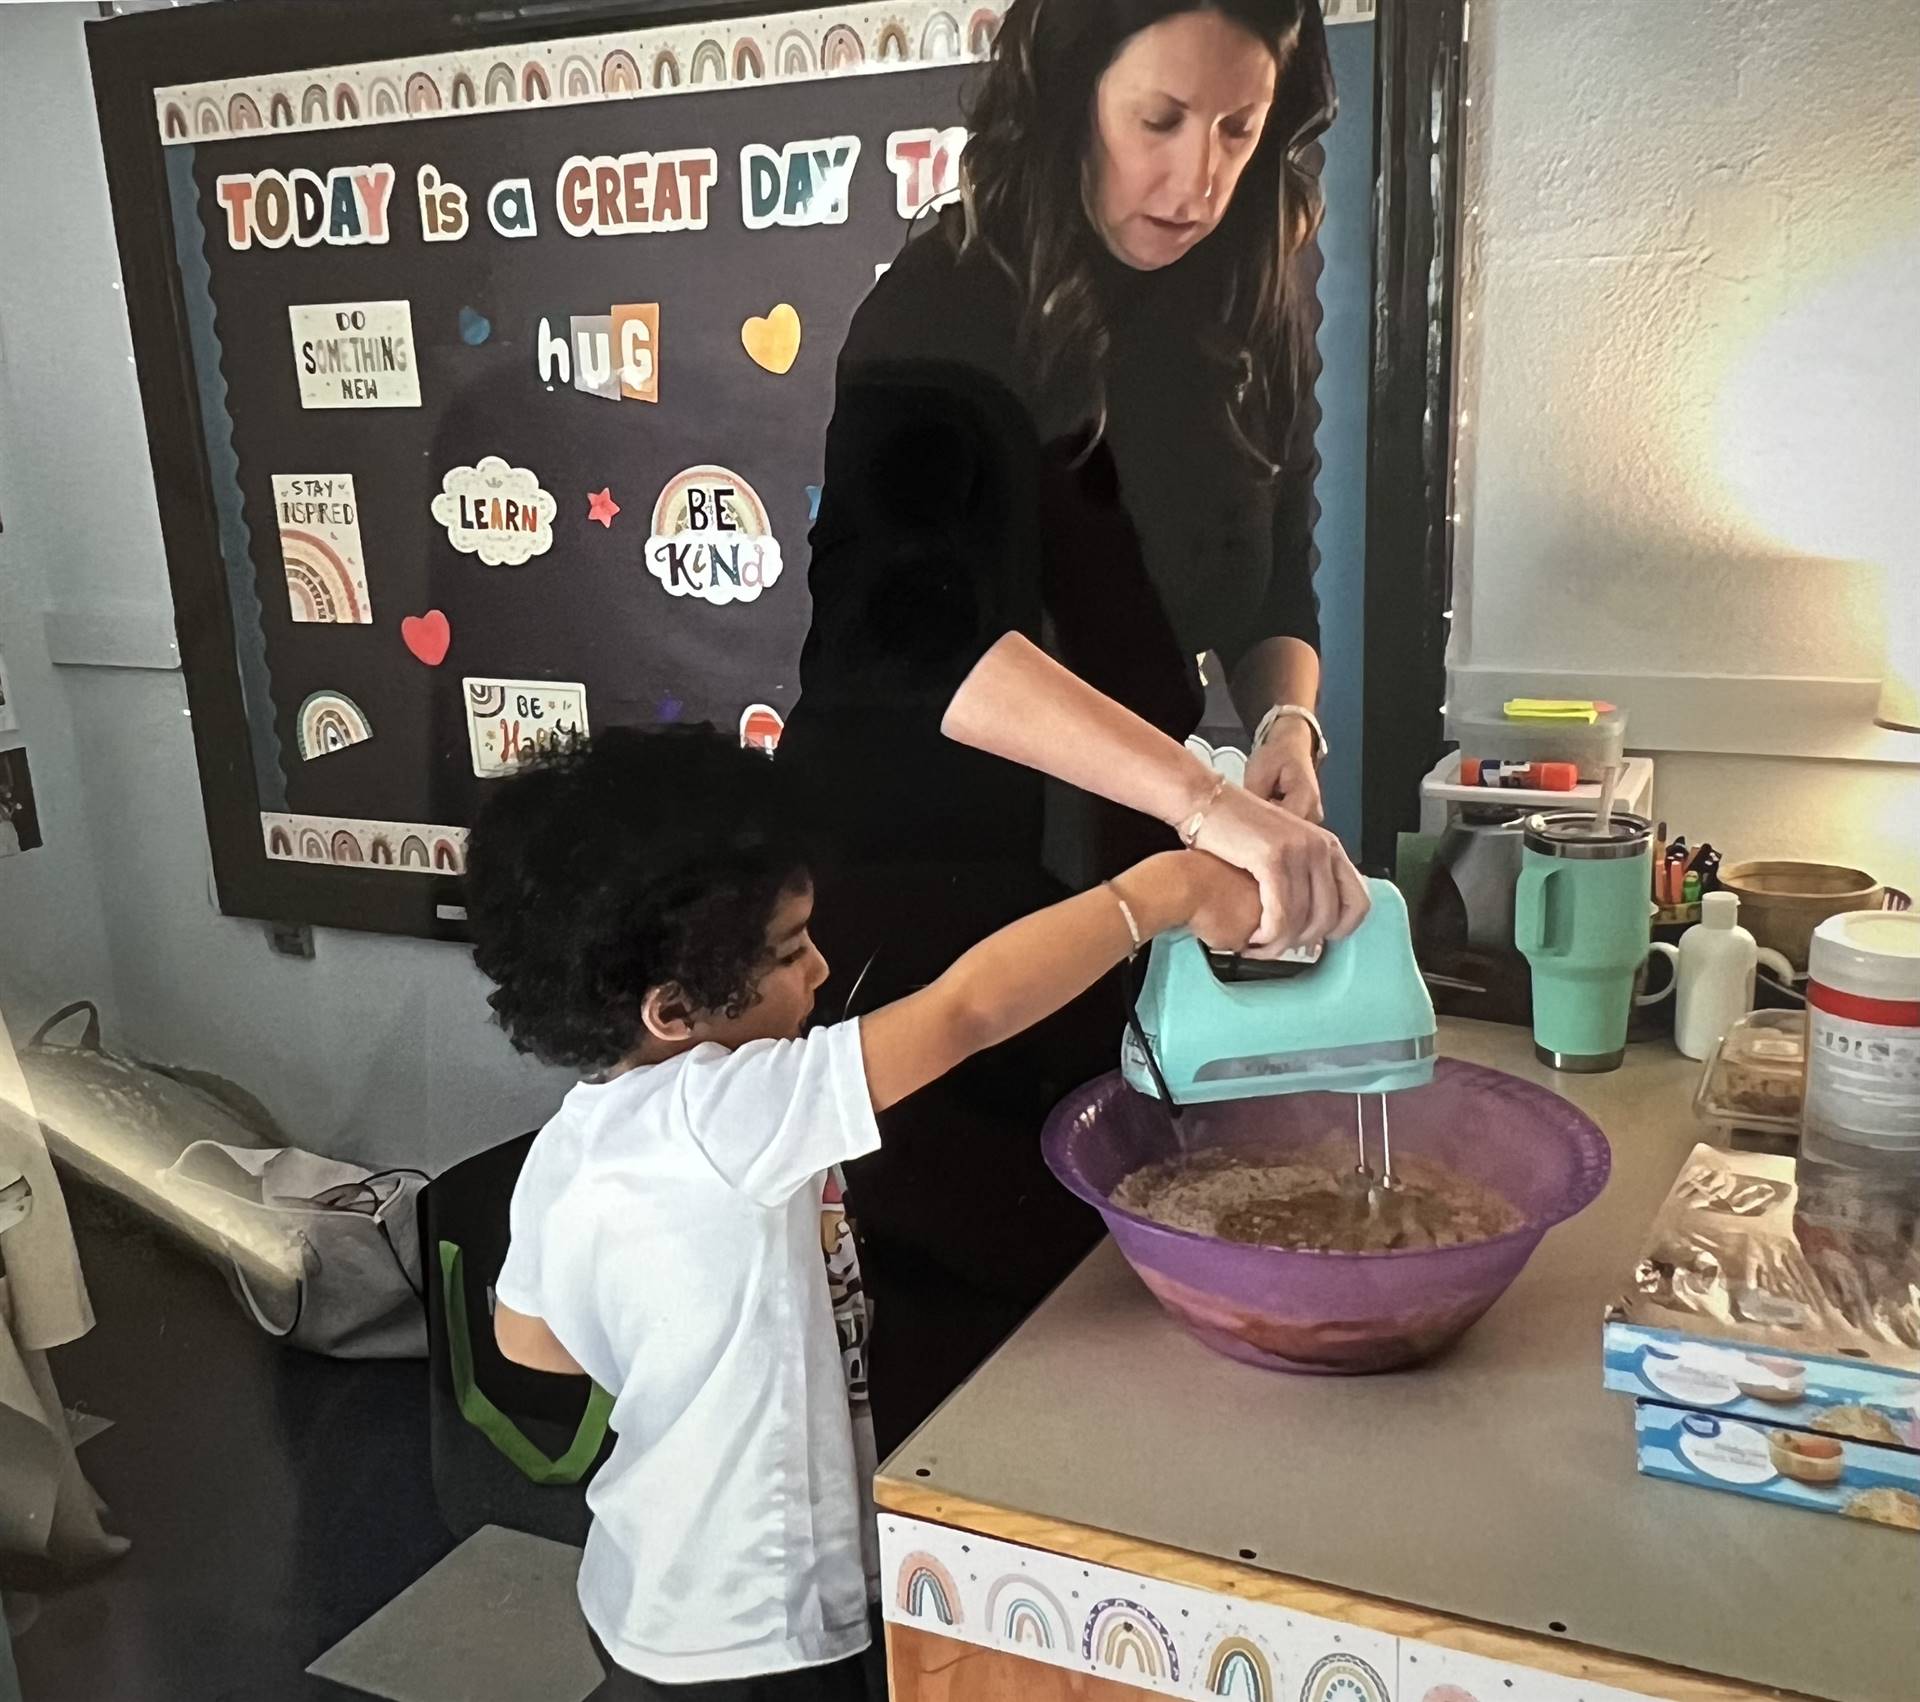 A teacher uses a mixer with a student to mix a batter.